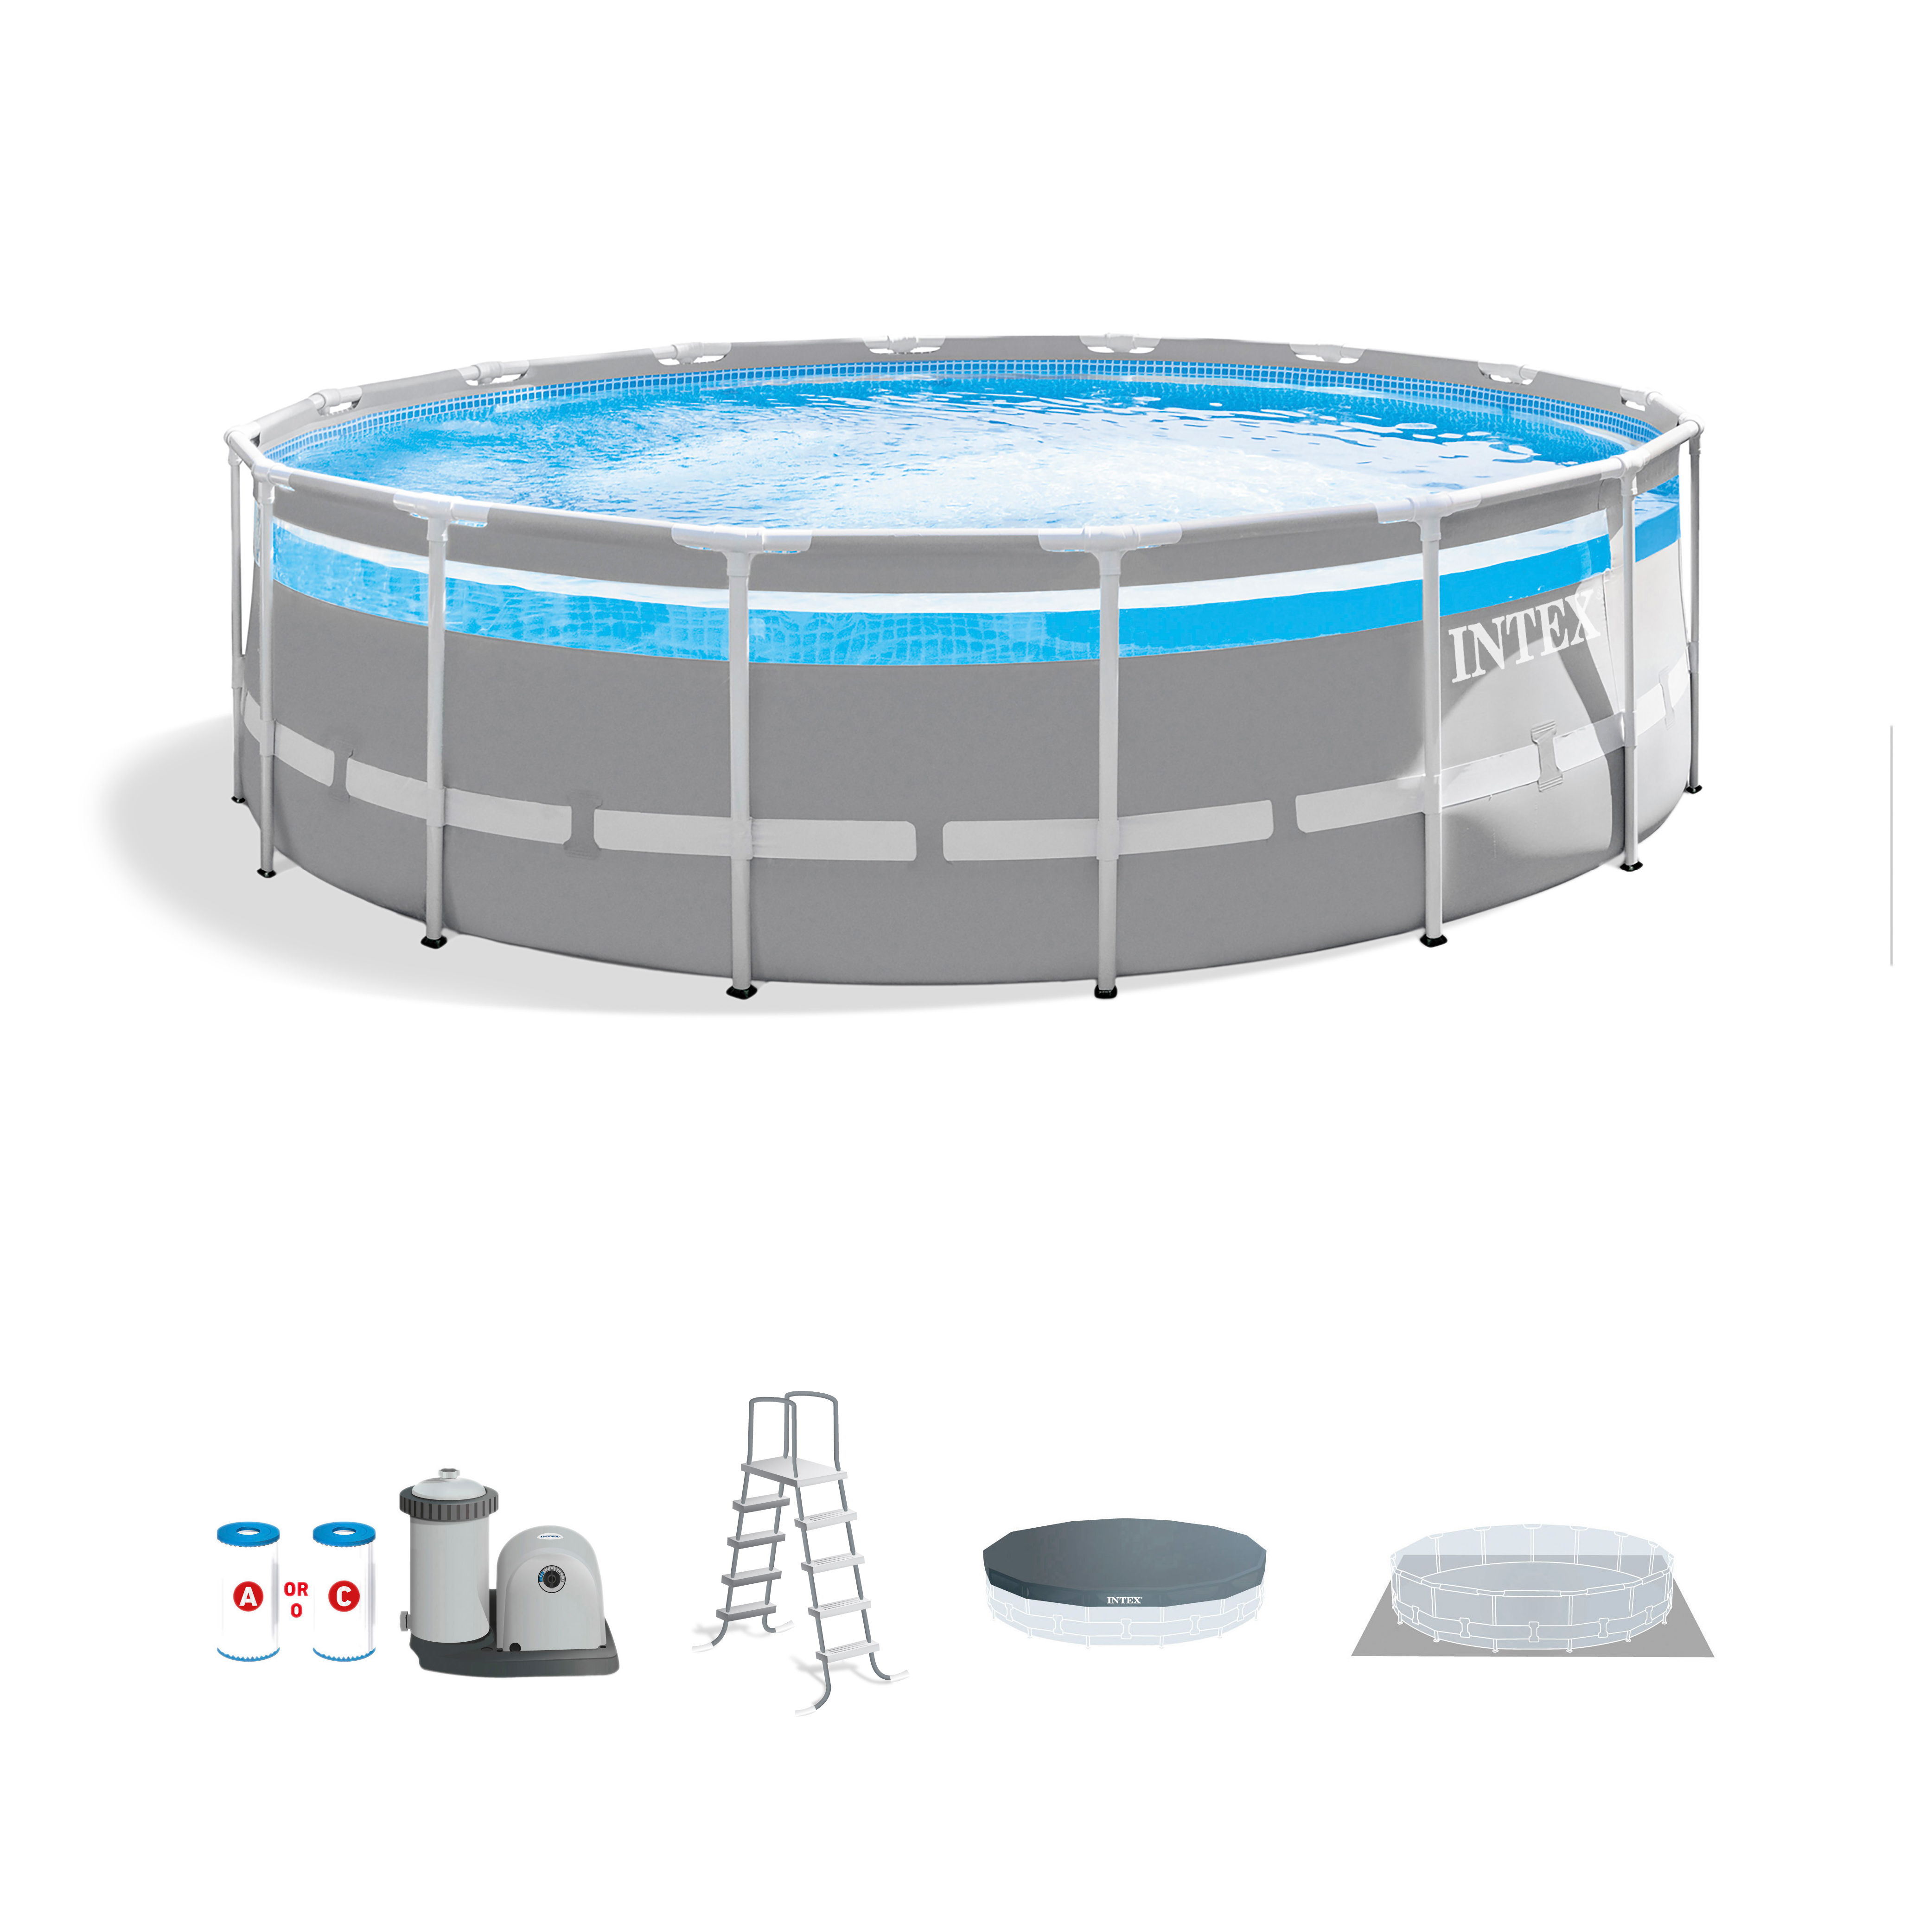 Intex 26729EH 16ft x 48in Clearview Prism Above Ground Swimming Pool w/Pump - image 1 of 13